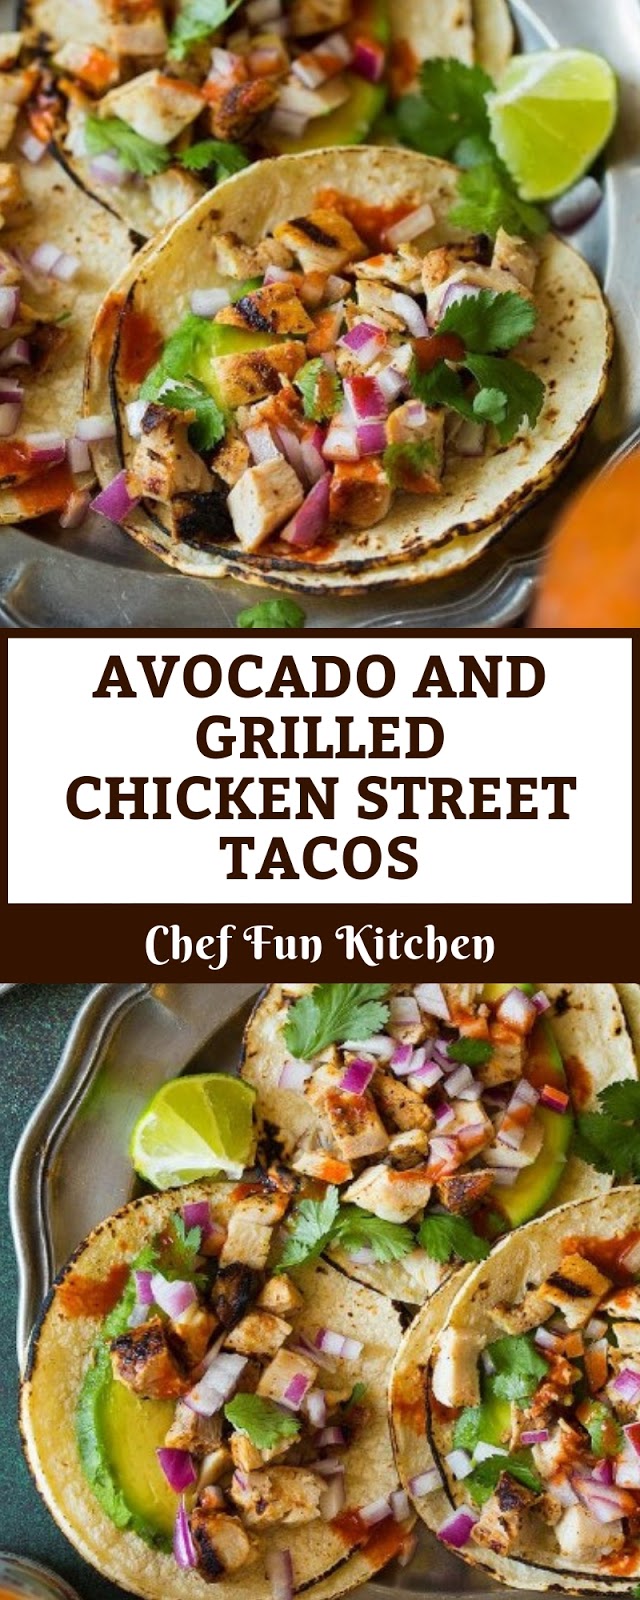 AVOCADO AND GRILLED CHICKEN STREET TACOS